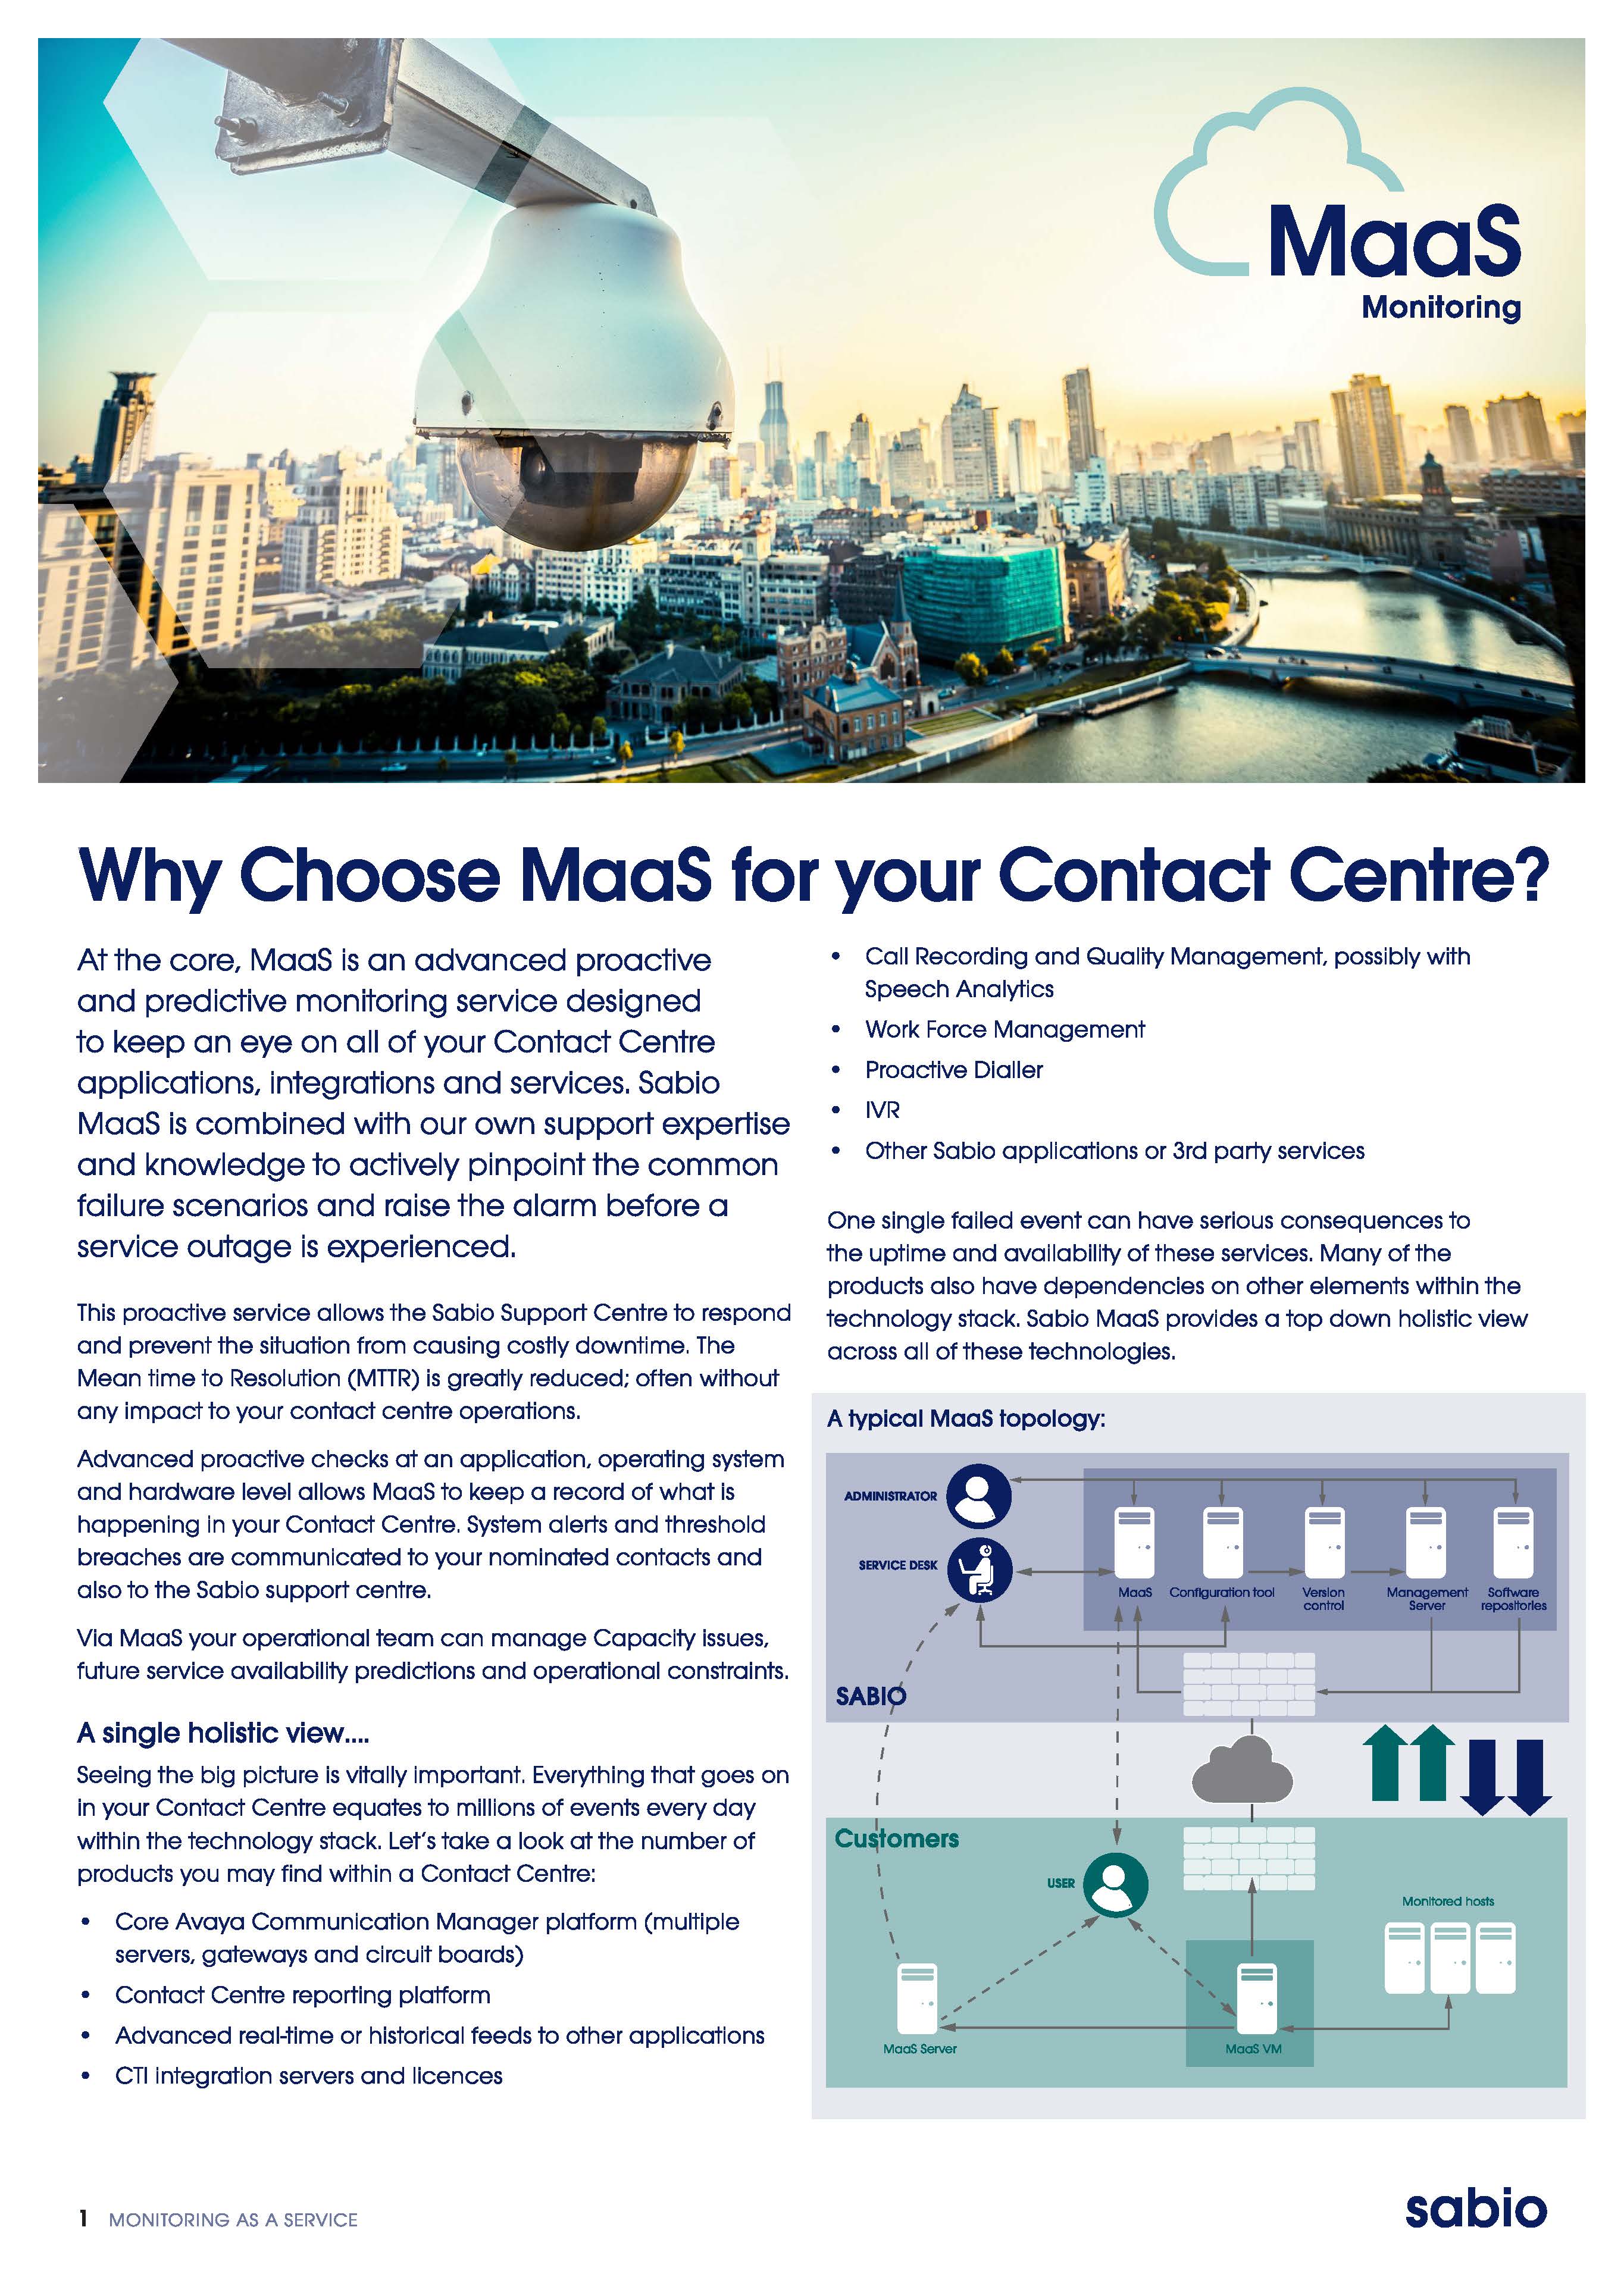 Why Choose MaaS for your Contact Centre?